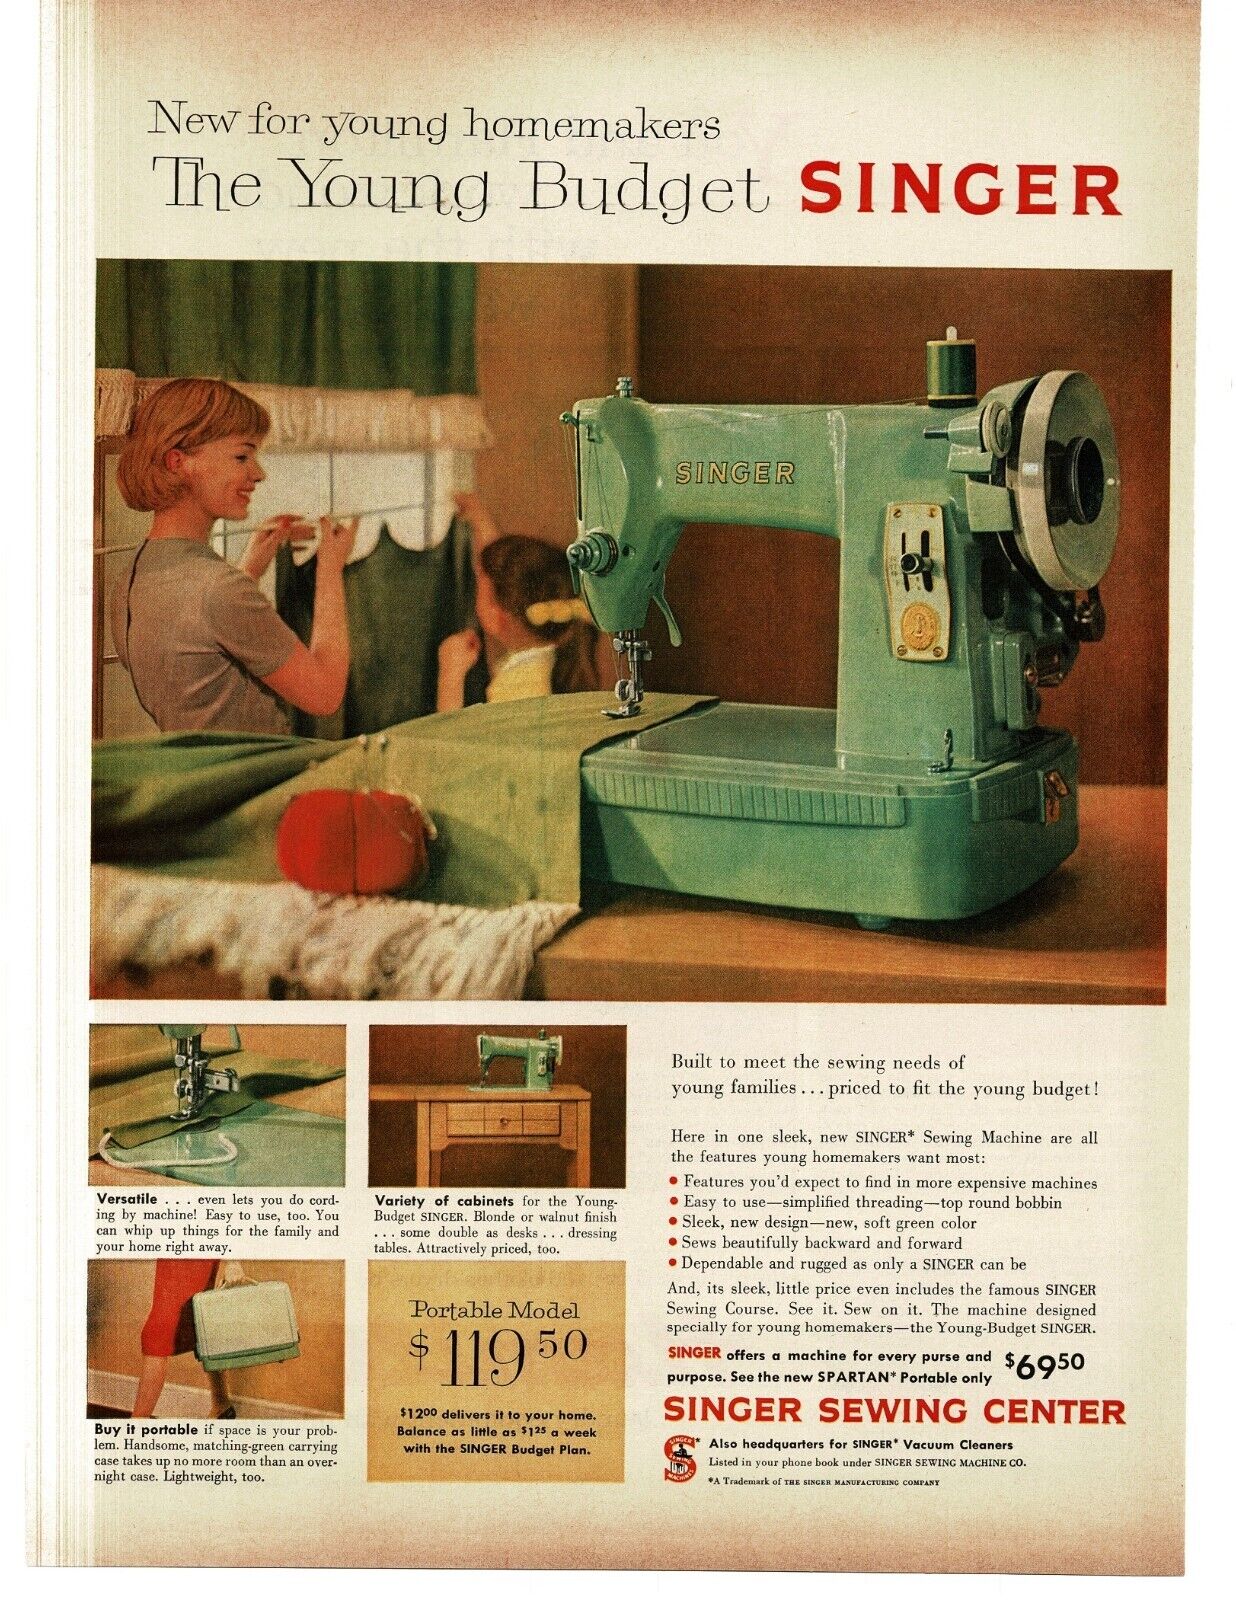 1959 Singer Young Budget Portable Sewing Machine Turquoise Vintage Print Ad